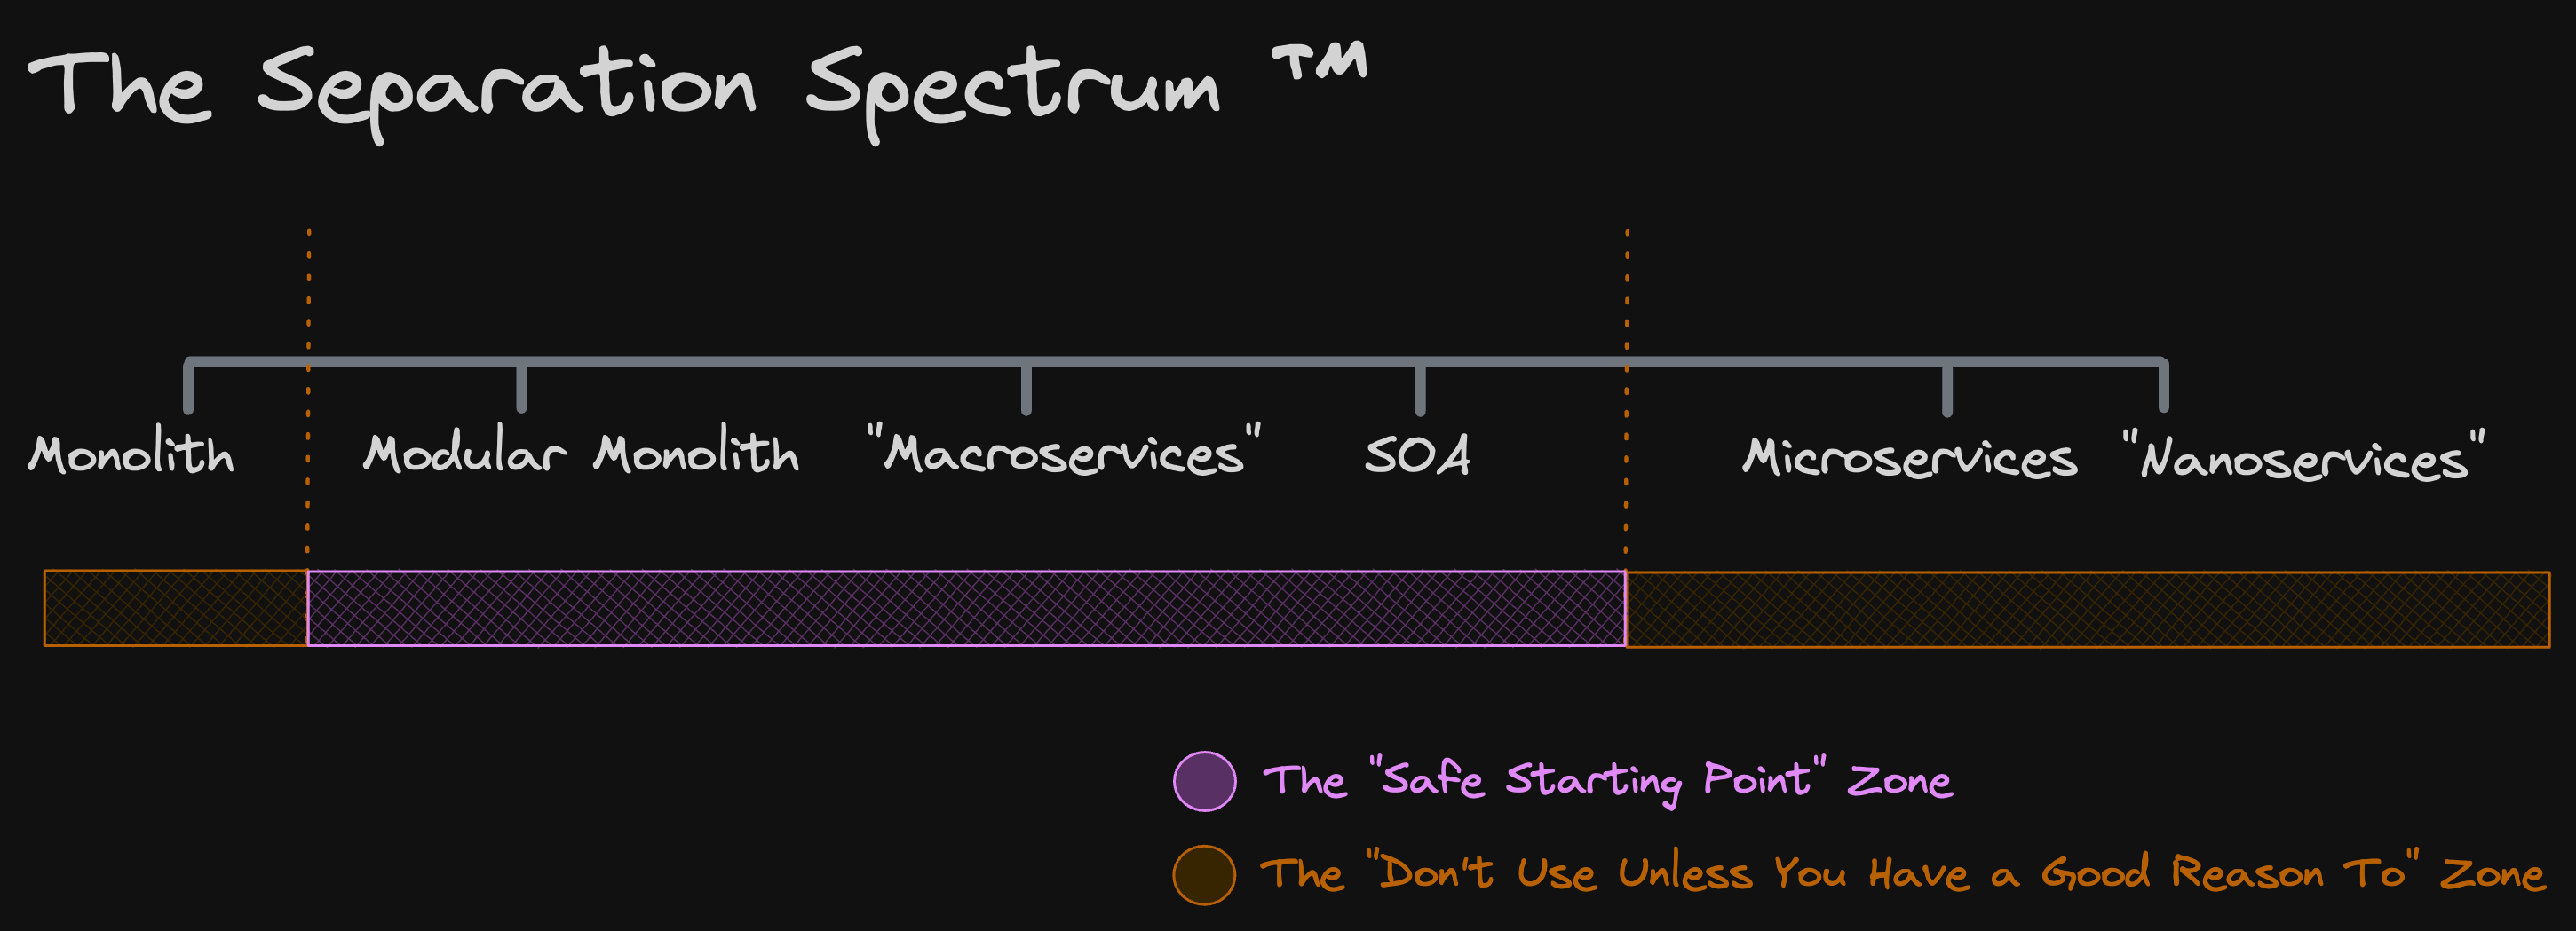 The separation spectrum, classified